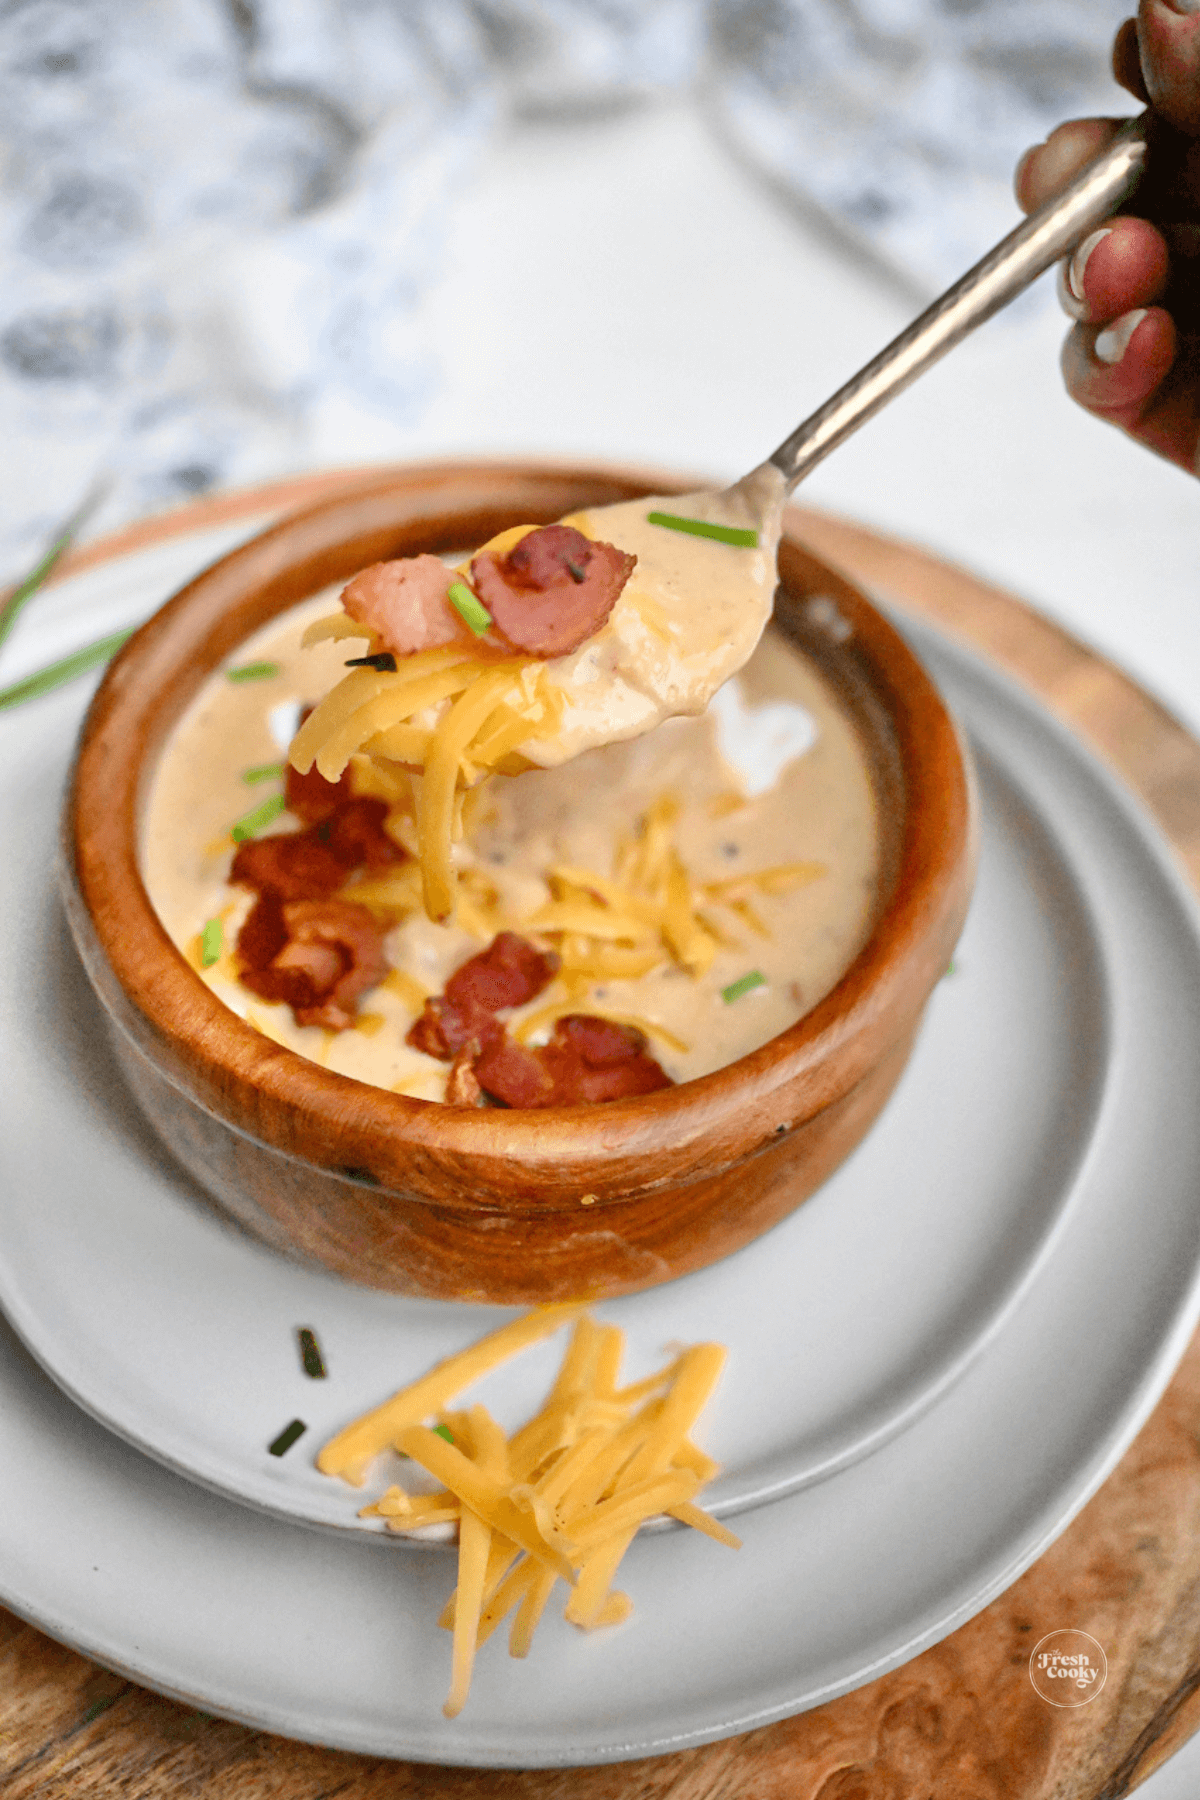 Spoonful of potato soup with melty cheddar cheese.